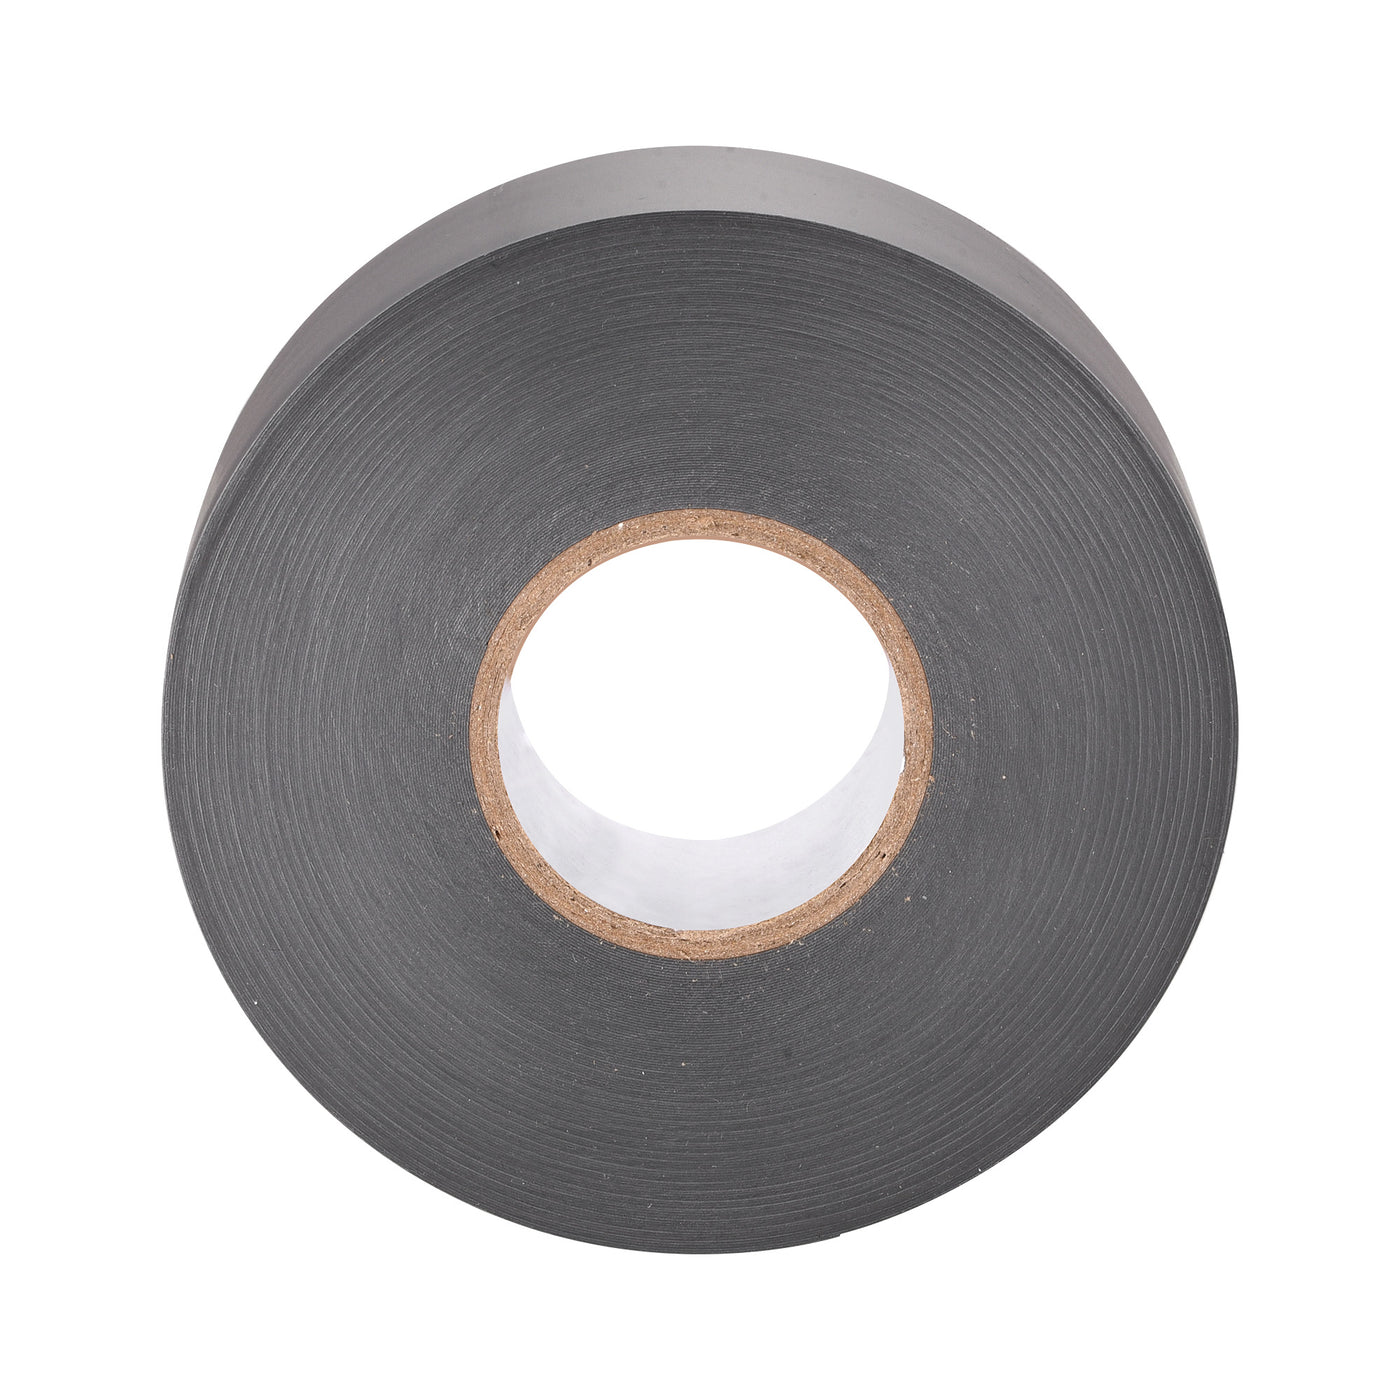 uxcell Uxcell Insulating Tape 25mm Width 26M Long 0.26mm Thick PVC Electrical Tape Grey